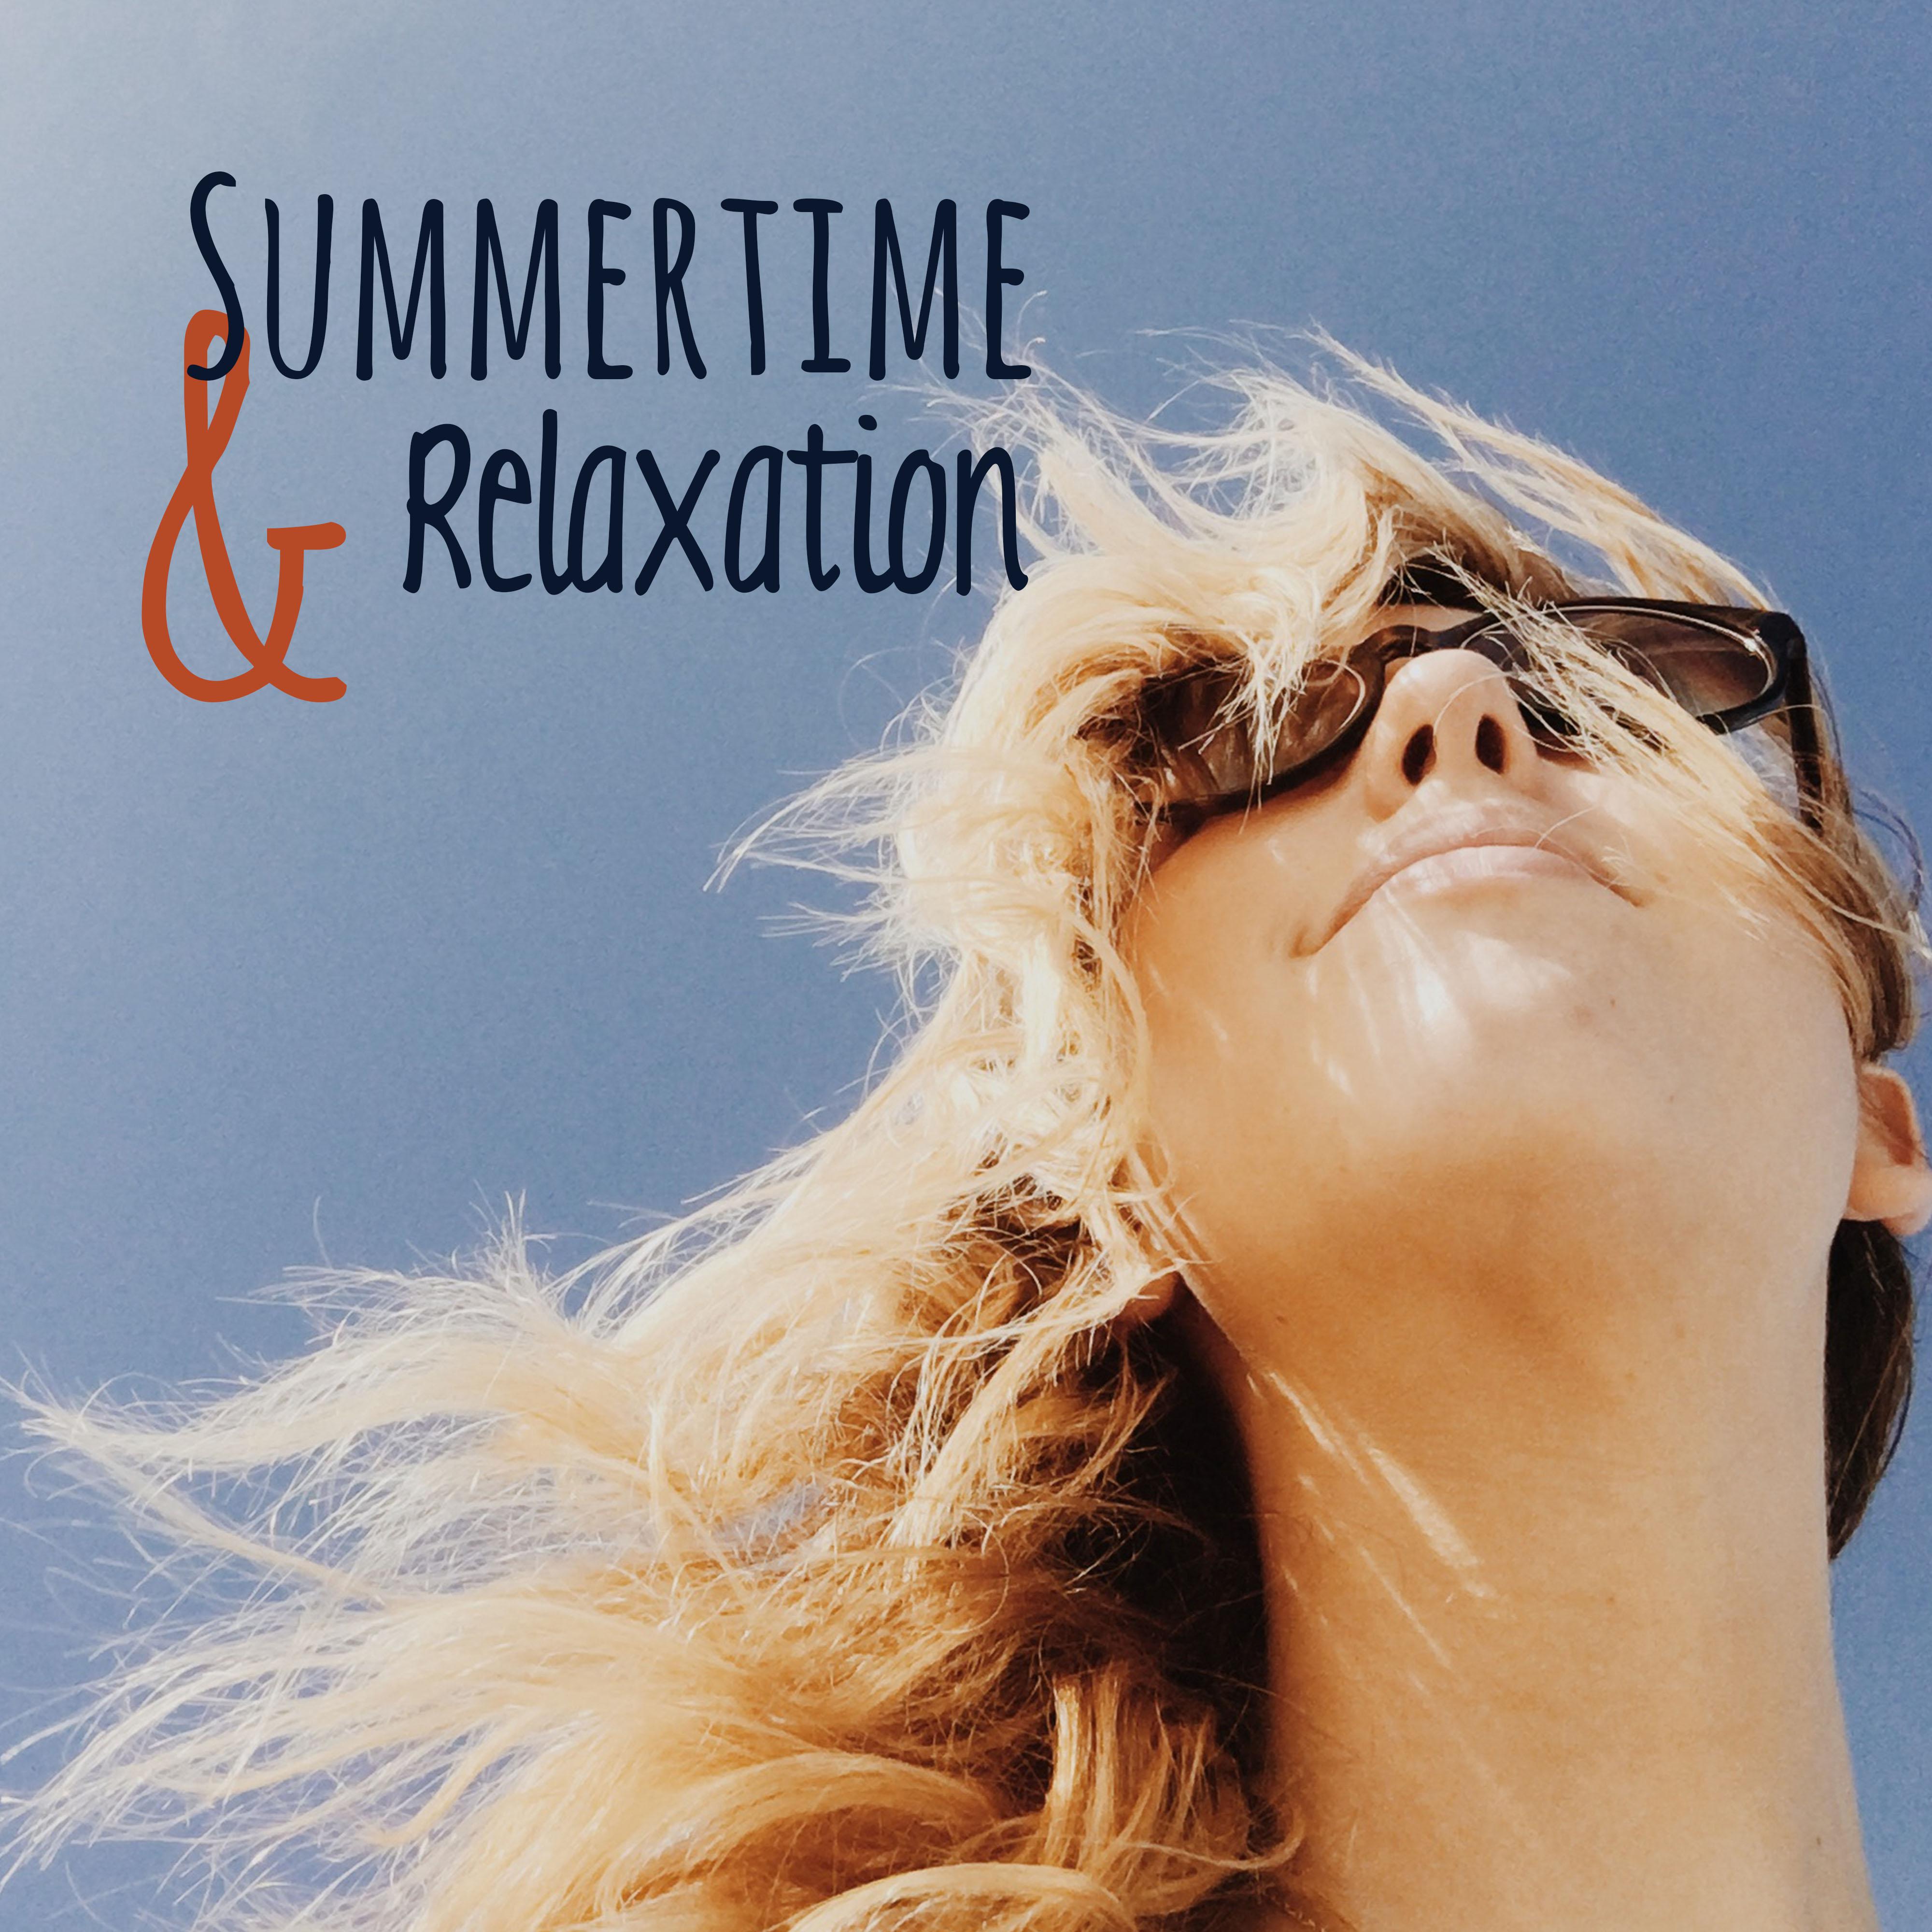 Summertime & Relaxation – Holiday Chill Out Music, Relax on the Beach, Total Rest, Chill Paradise, Deep Sun